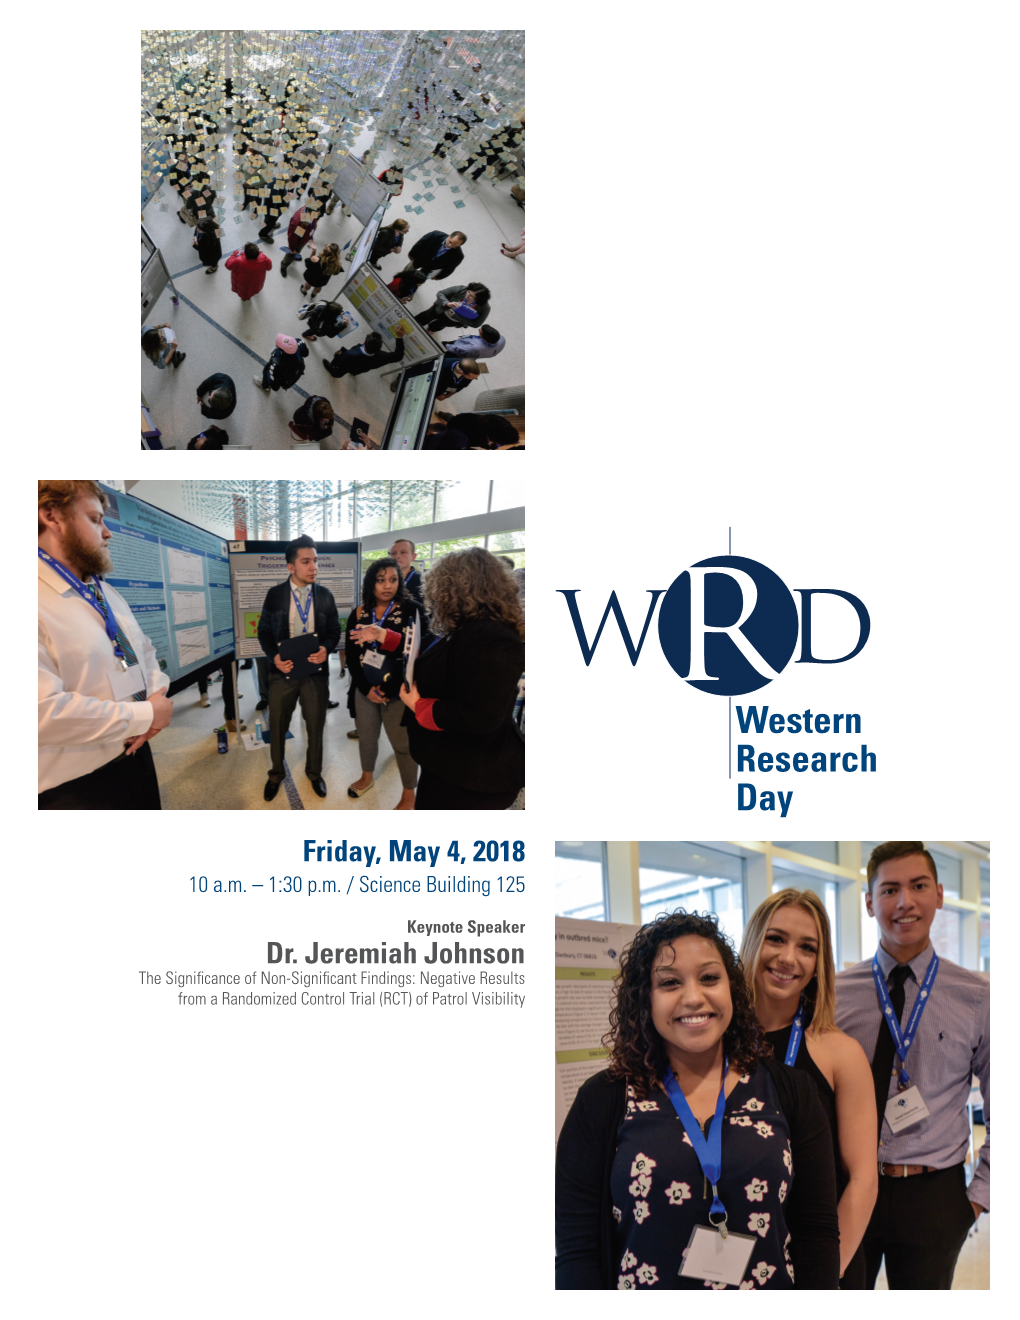 Western Research Day Friday, May 4, 2018 10 A.M